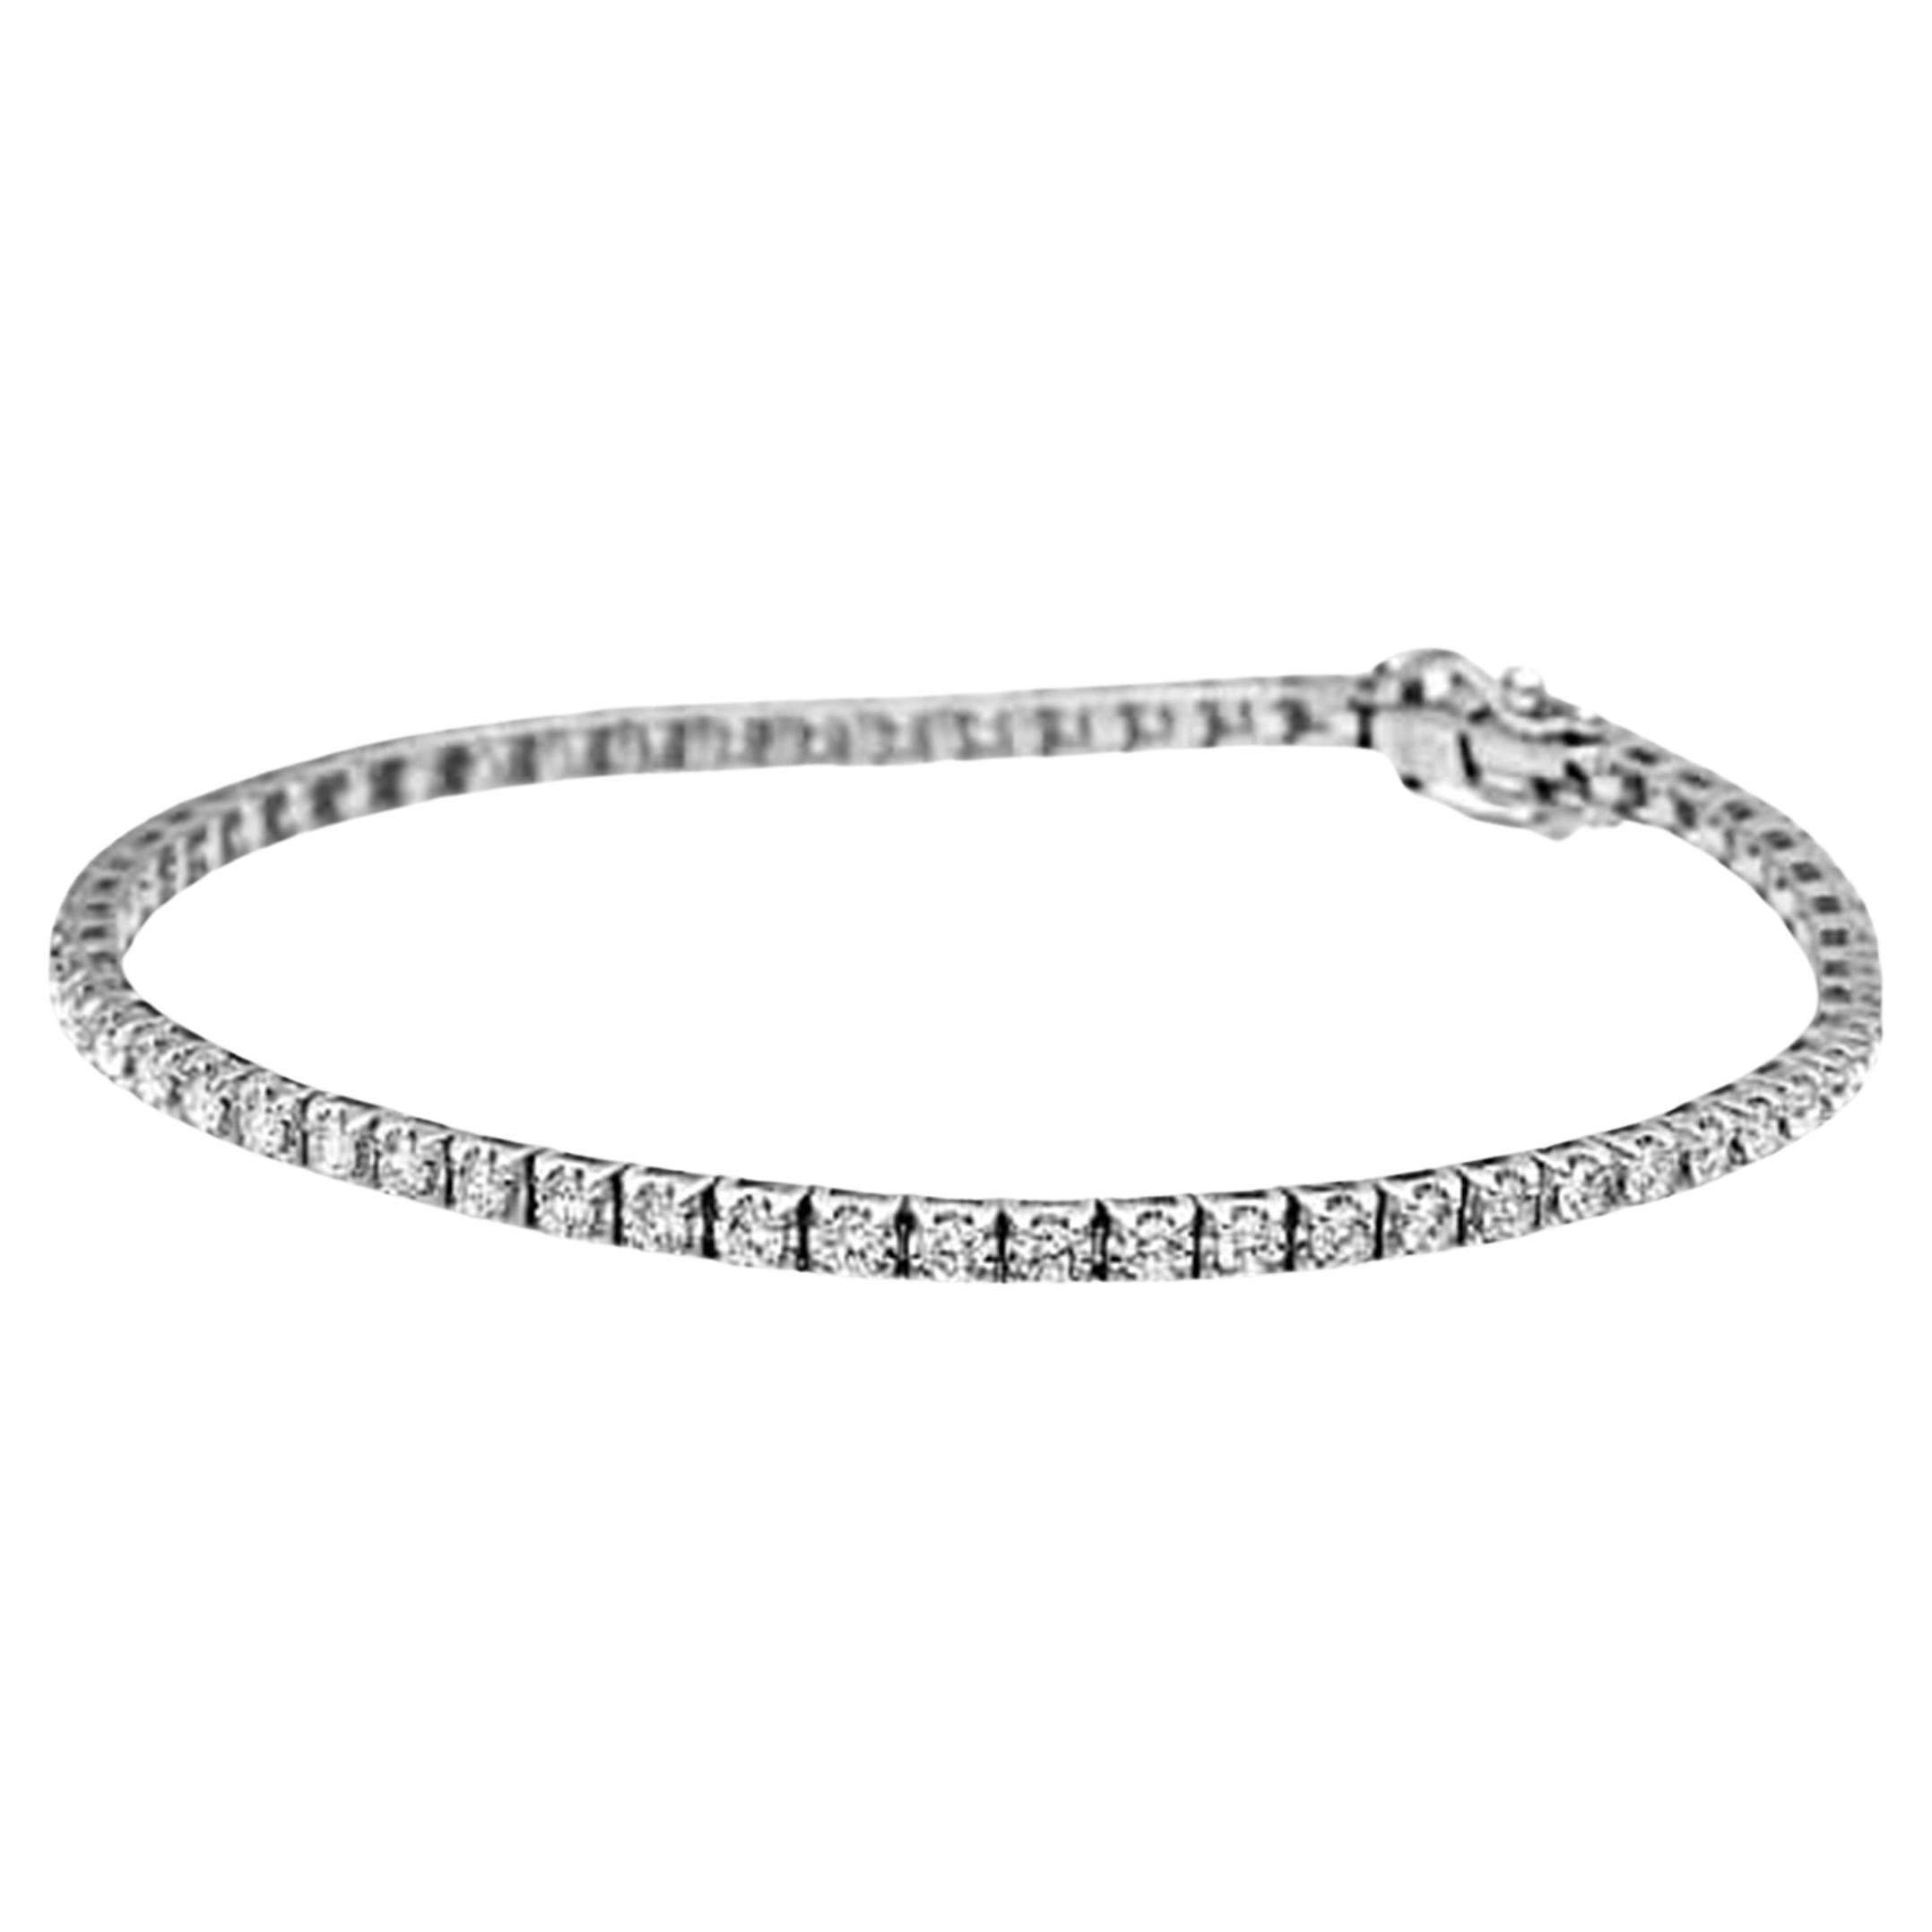 18K White Gold Diamond Tennis Bracelet  5.17ct Total Weight  Approx. 18cm  For Sale